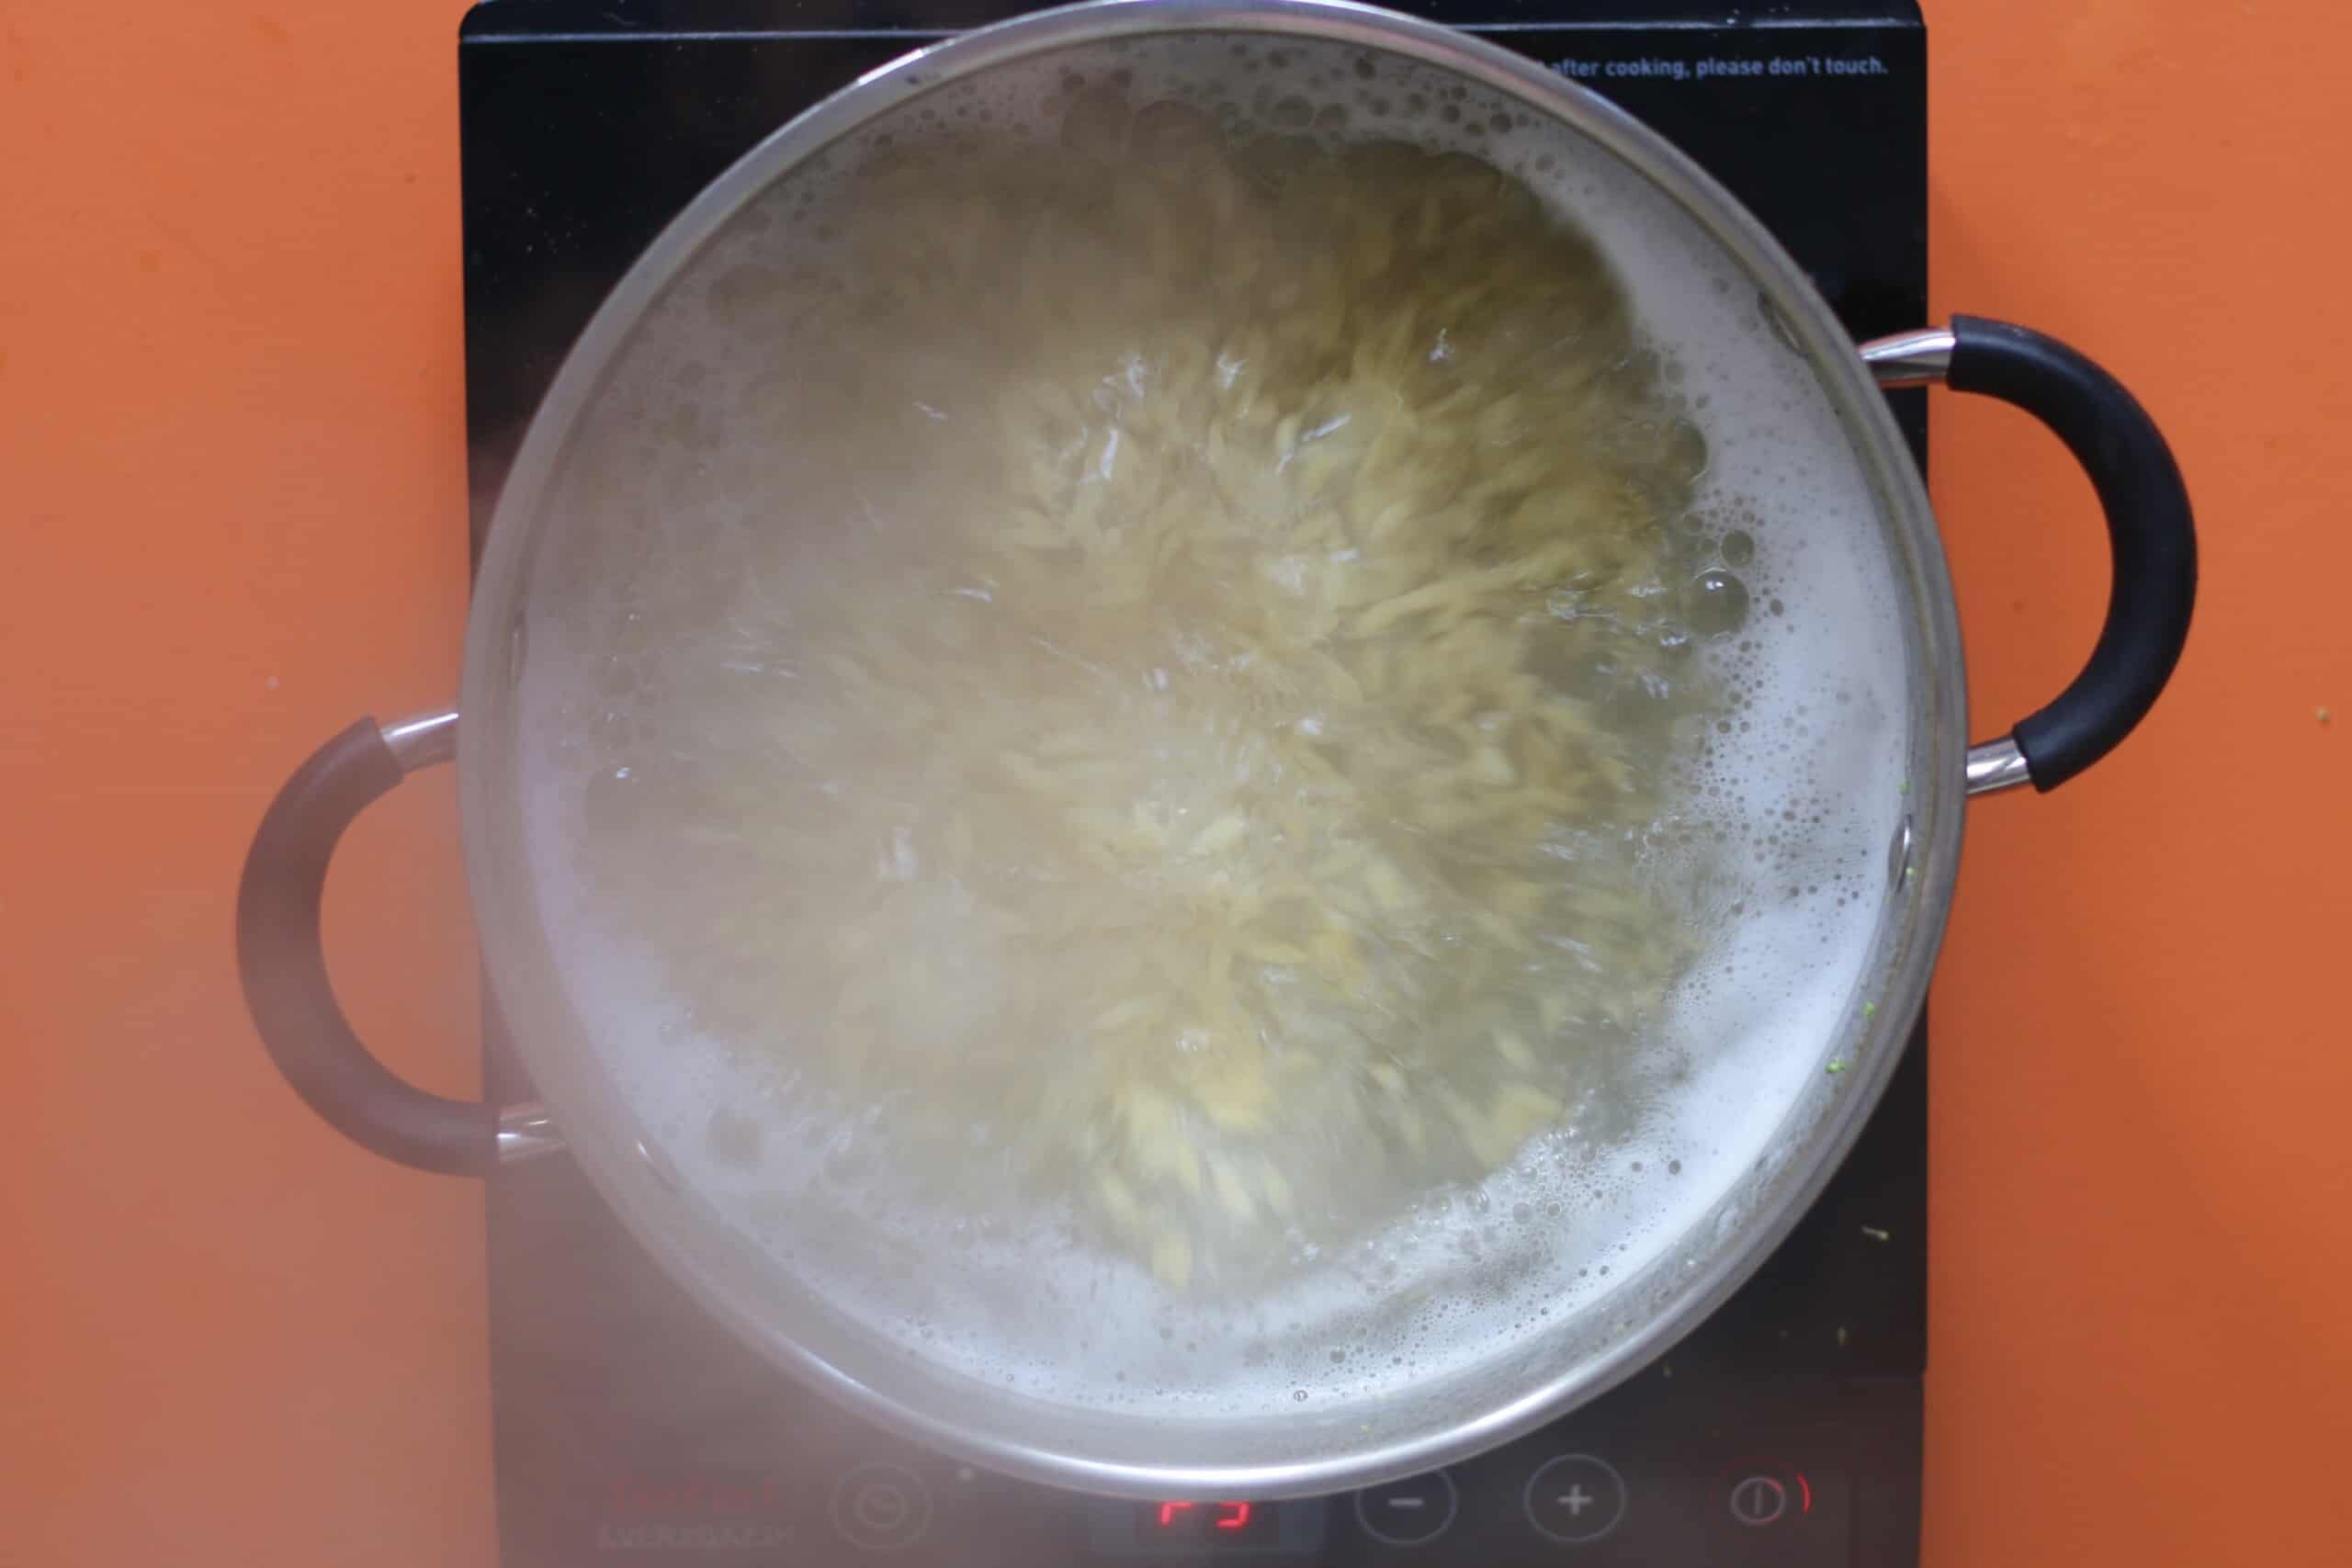 Orzo in saucepan with boiling water on cooker